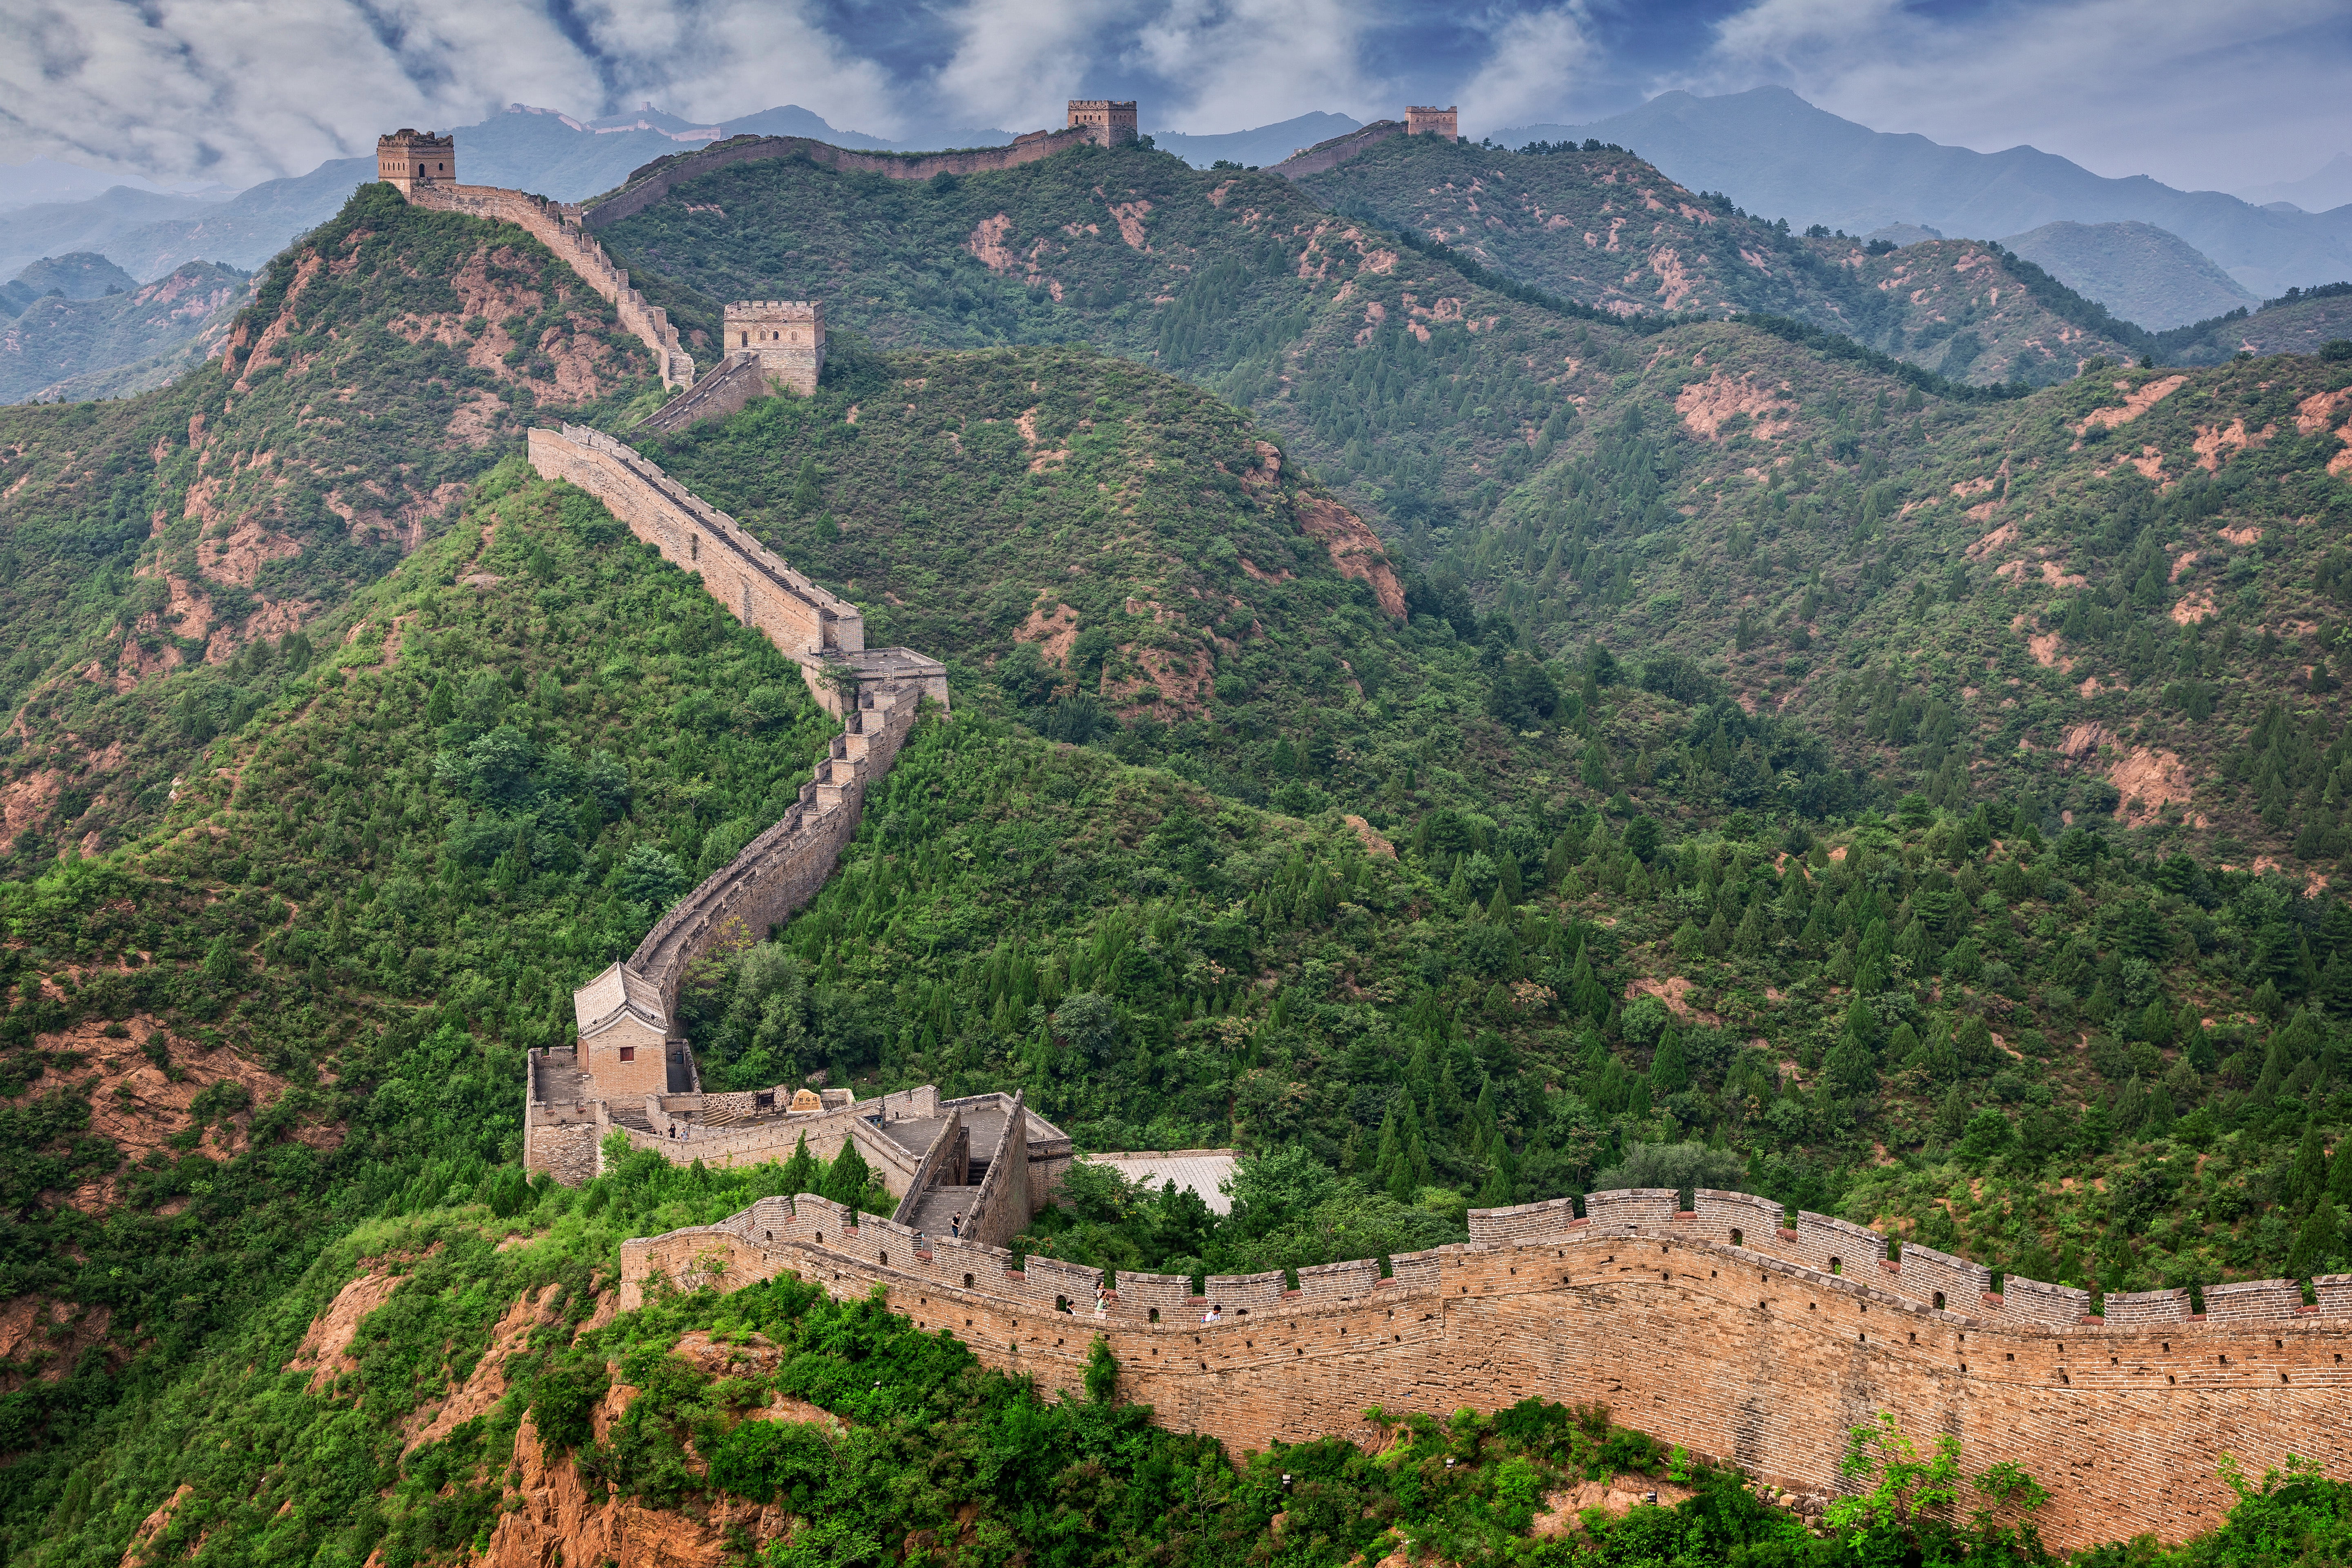 Great Wall of China, China, landscape, mountains, nature, the great wall of China